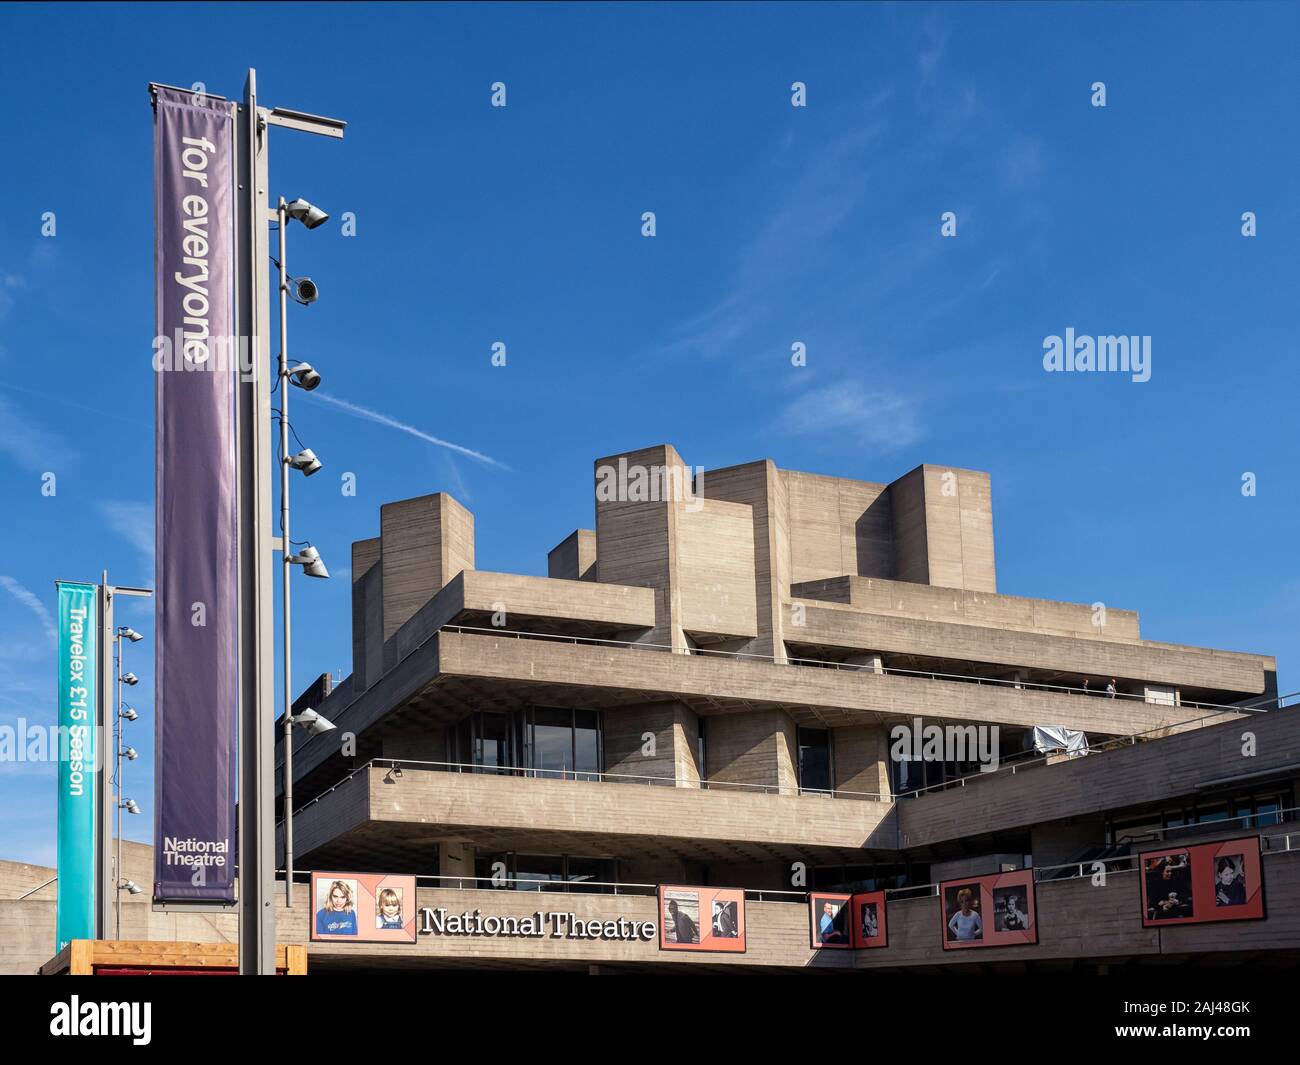 LONDON, UK - SEPTEMBER 29, 2018:  Exterior view of the National Theatre with signs Stock Photo